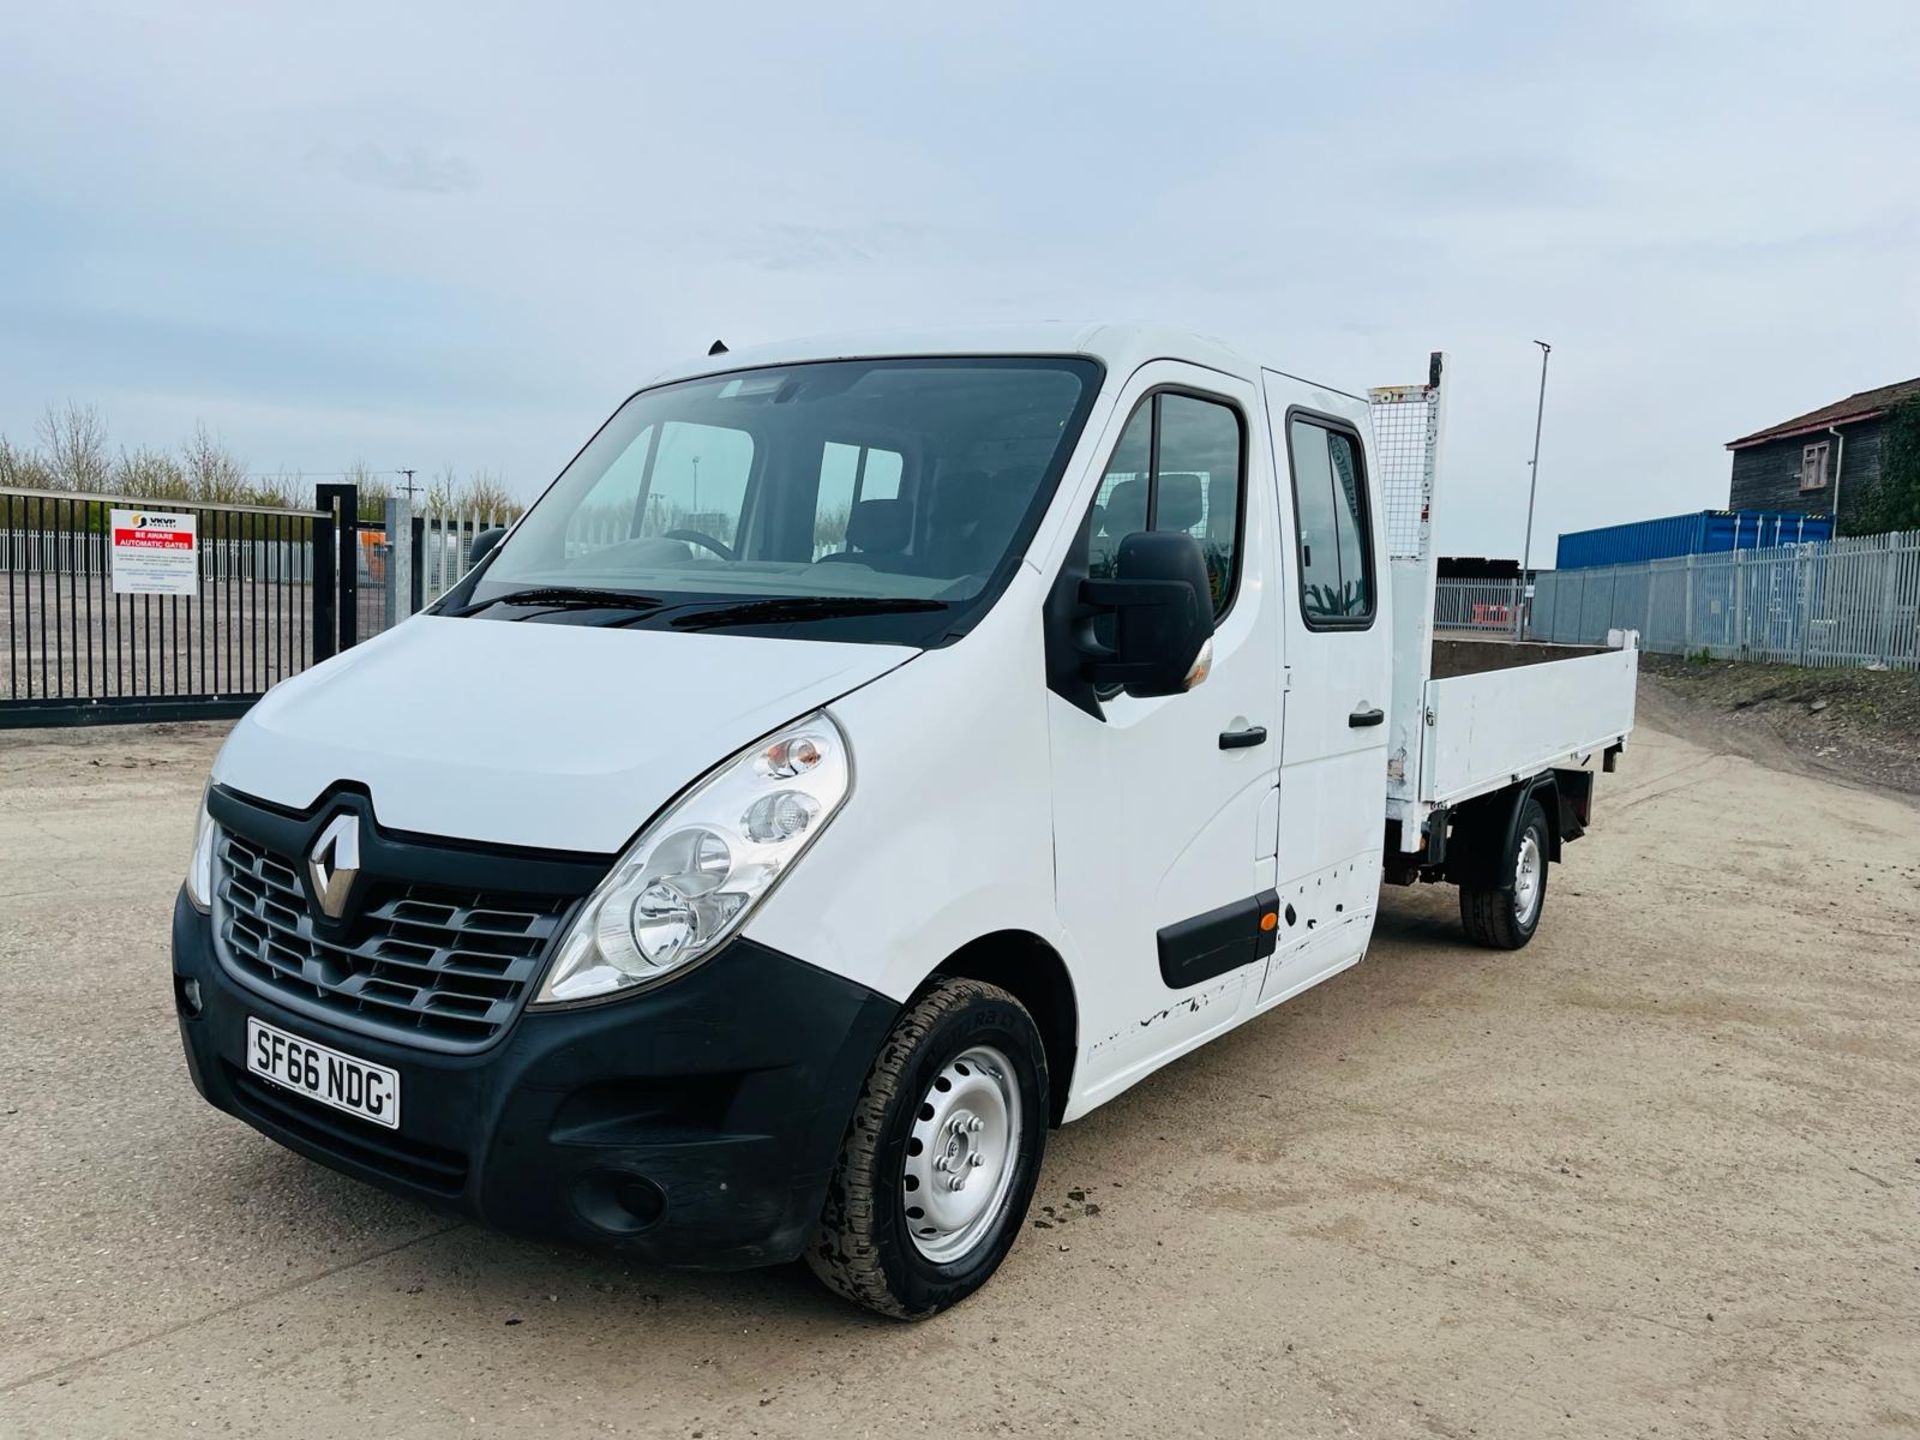 ** ON SALE ** Renault Master 2.3 TCI 125 Business Crewcab 3.5T Tipper 2016 '66 Reg'-Tow Bar-No VAT - Image 4 of 36